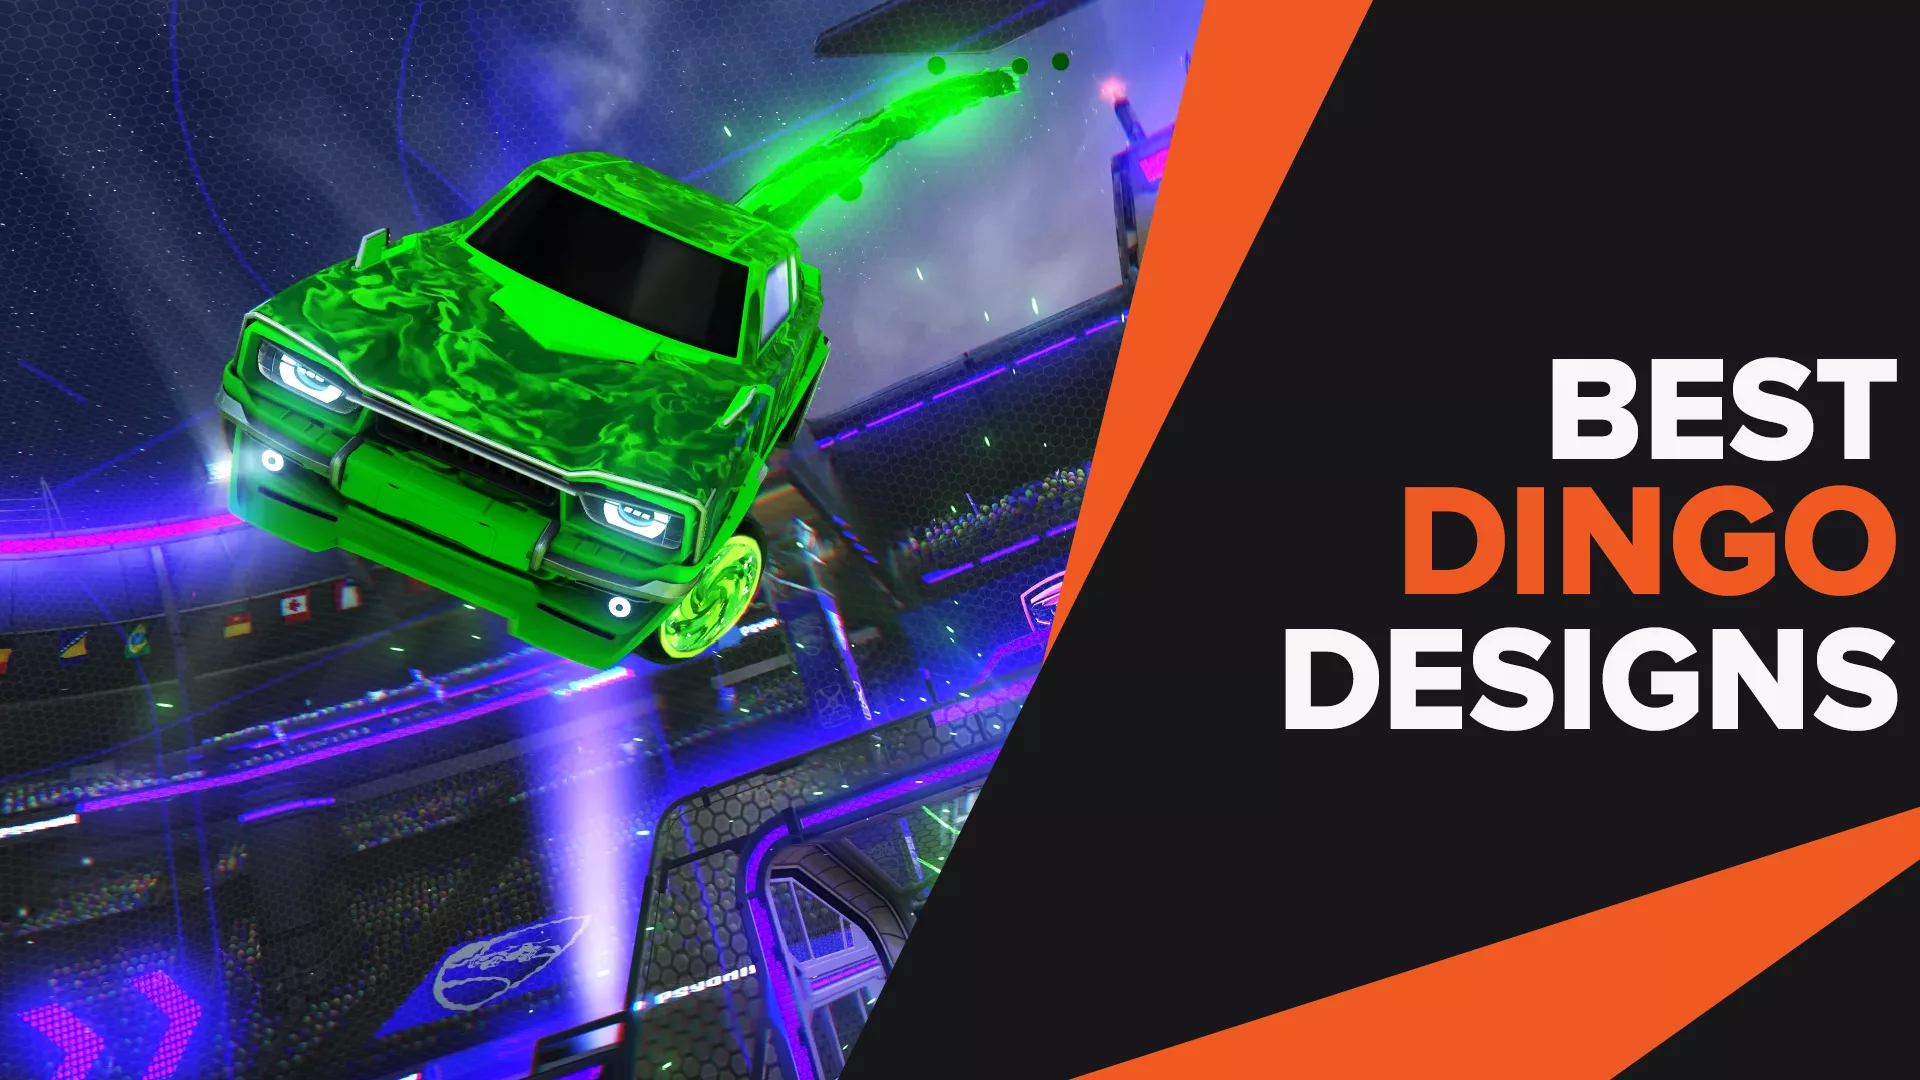 Best Dingo Designs That Turn Into a Fashionista in Rocket League